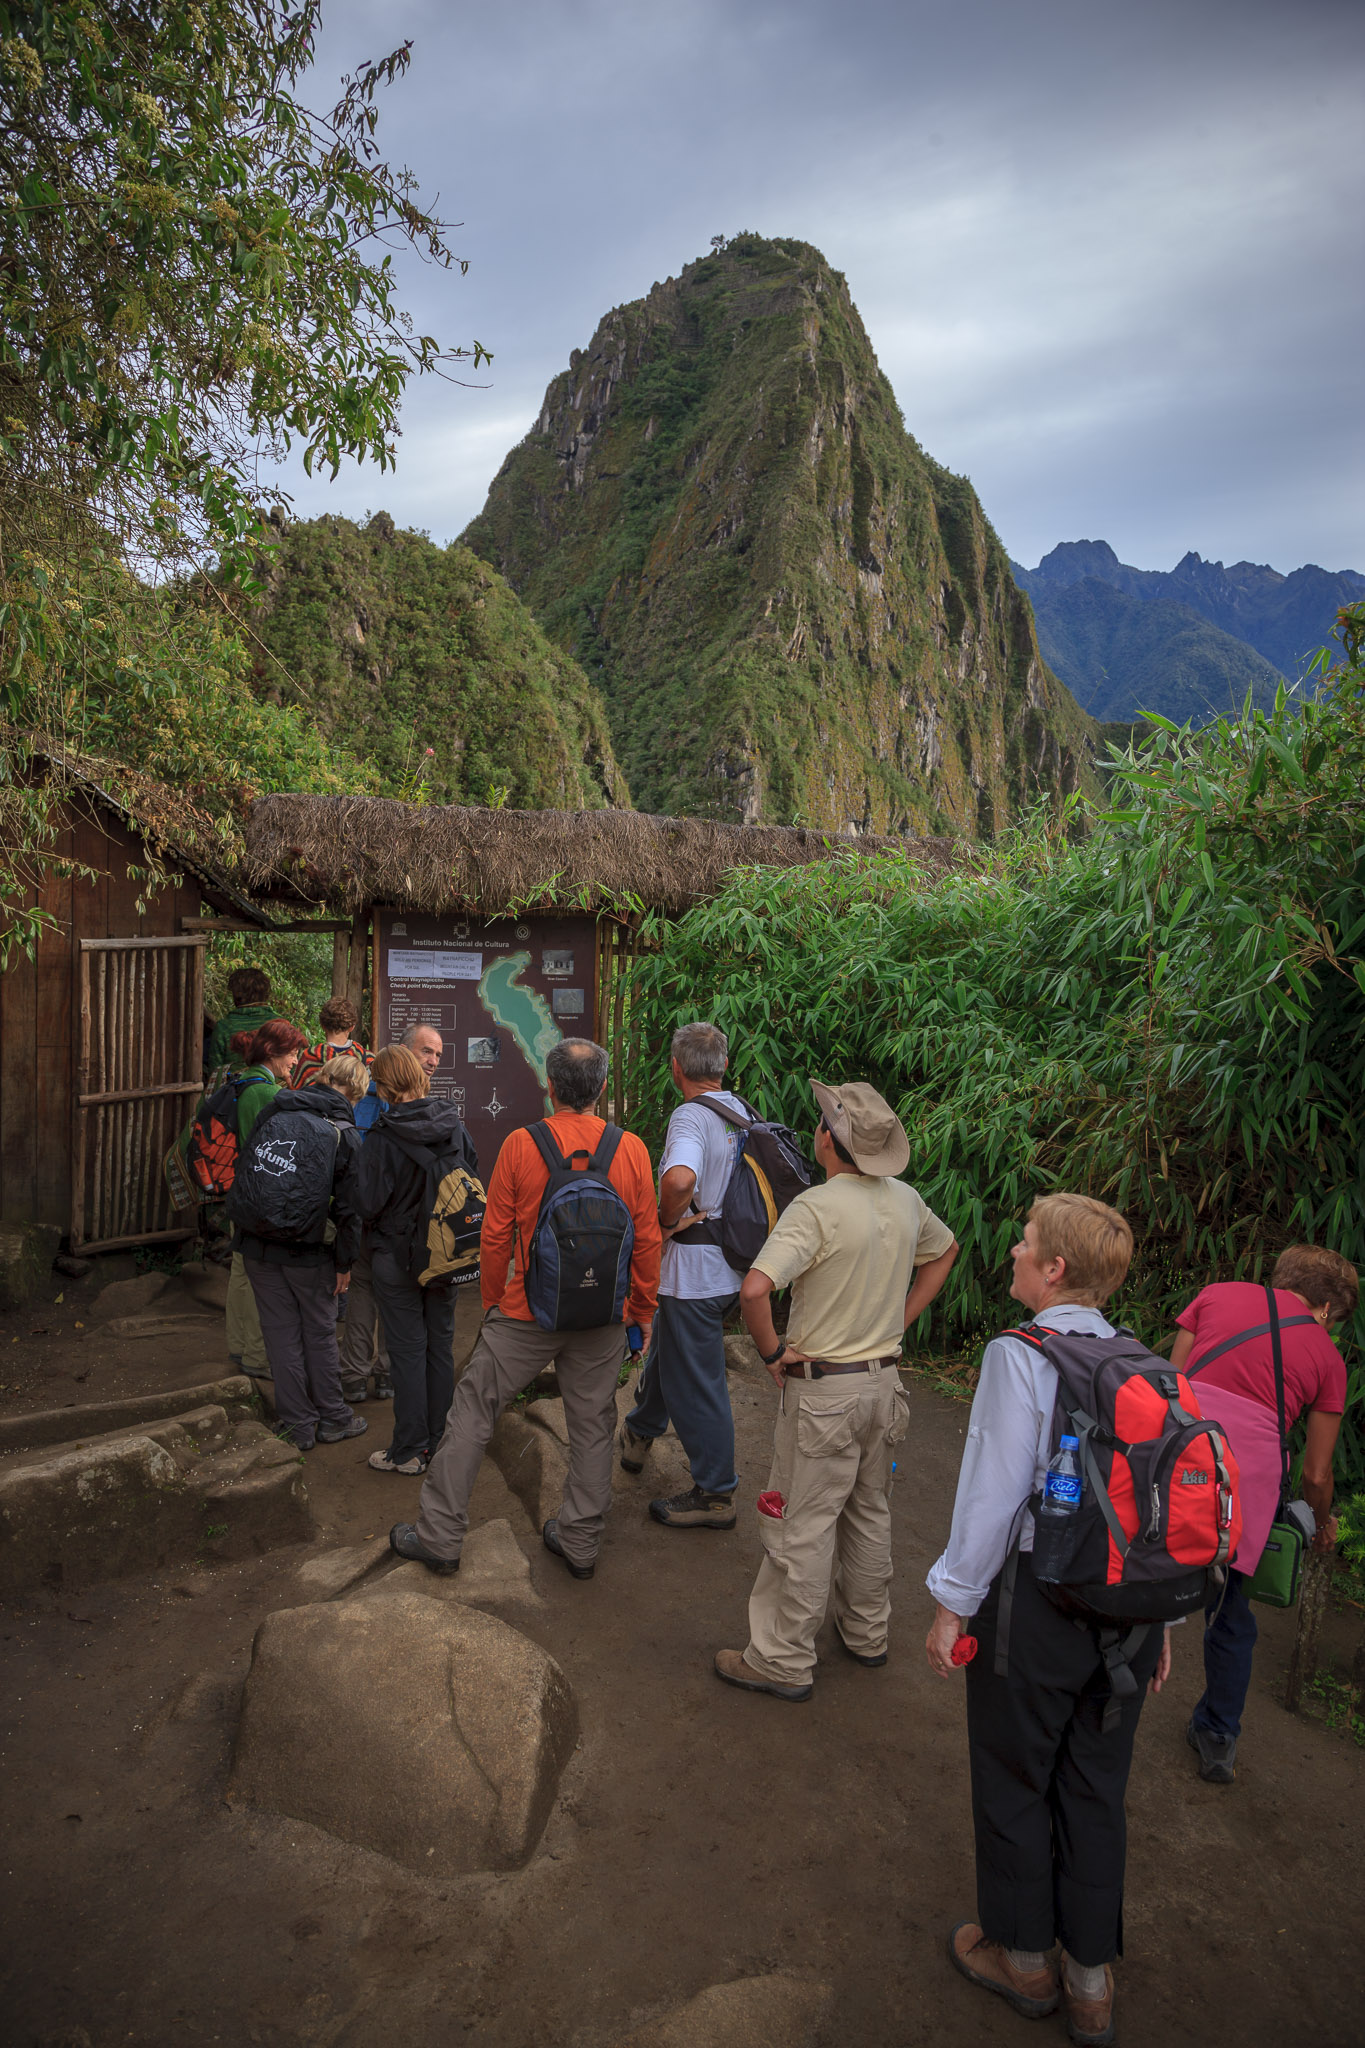 Waiting to enter trail to Wayna Picchu (300 max. persons per day)